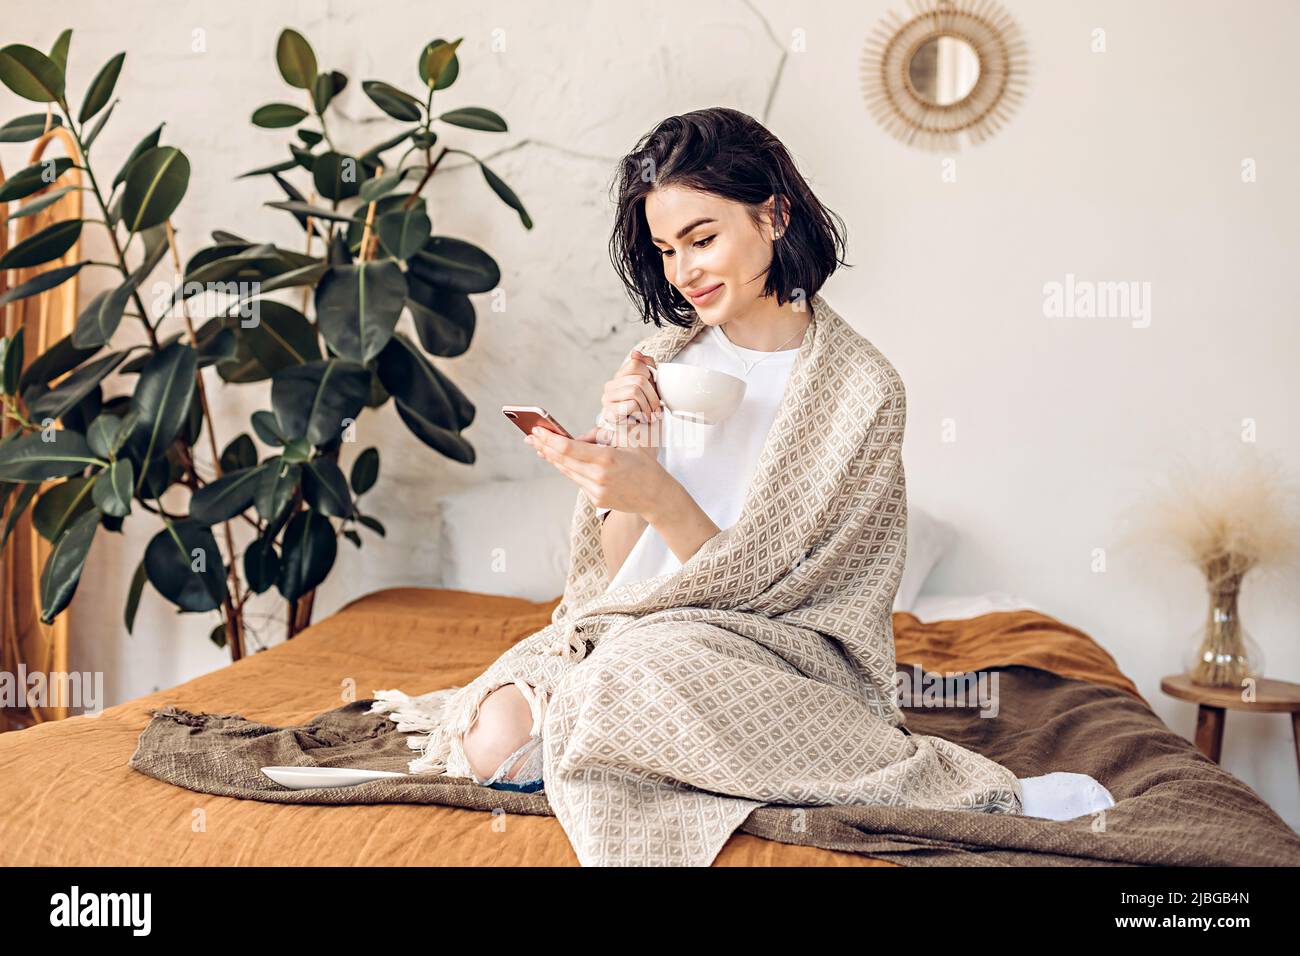 Lifestyle portrait of a happy young girl browsing the news on the phone over a cup of tea or coffee in bed early in the morning Stock Photo